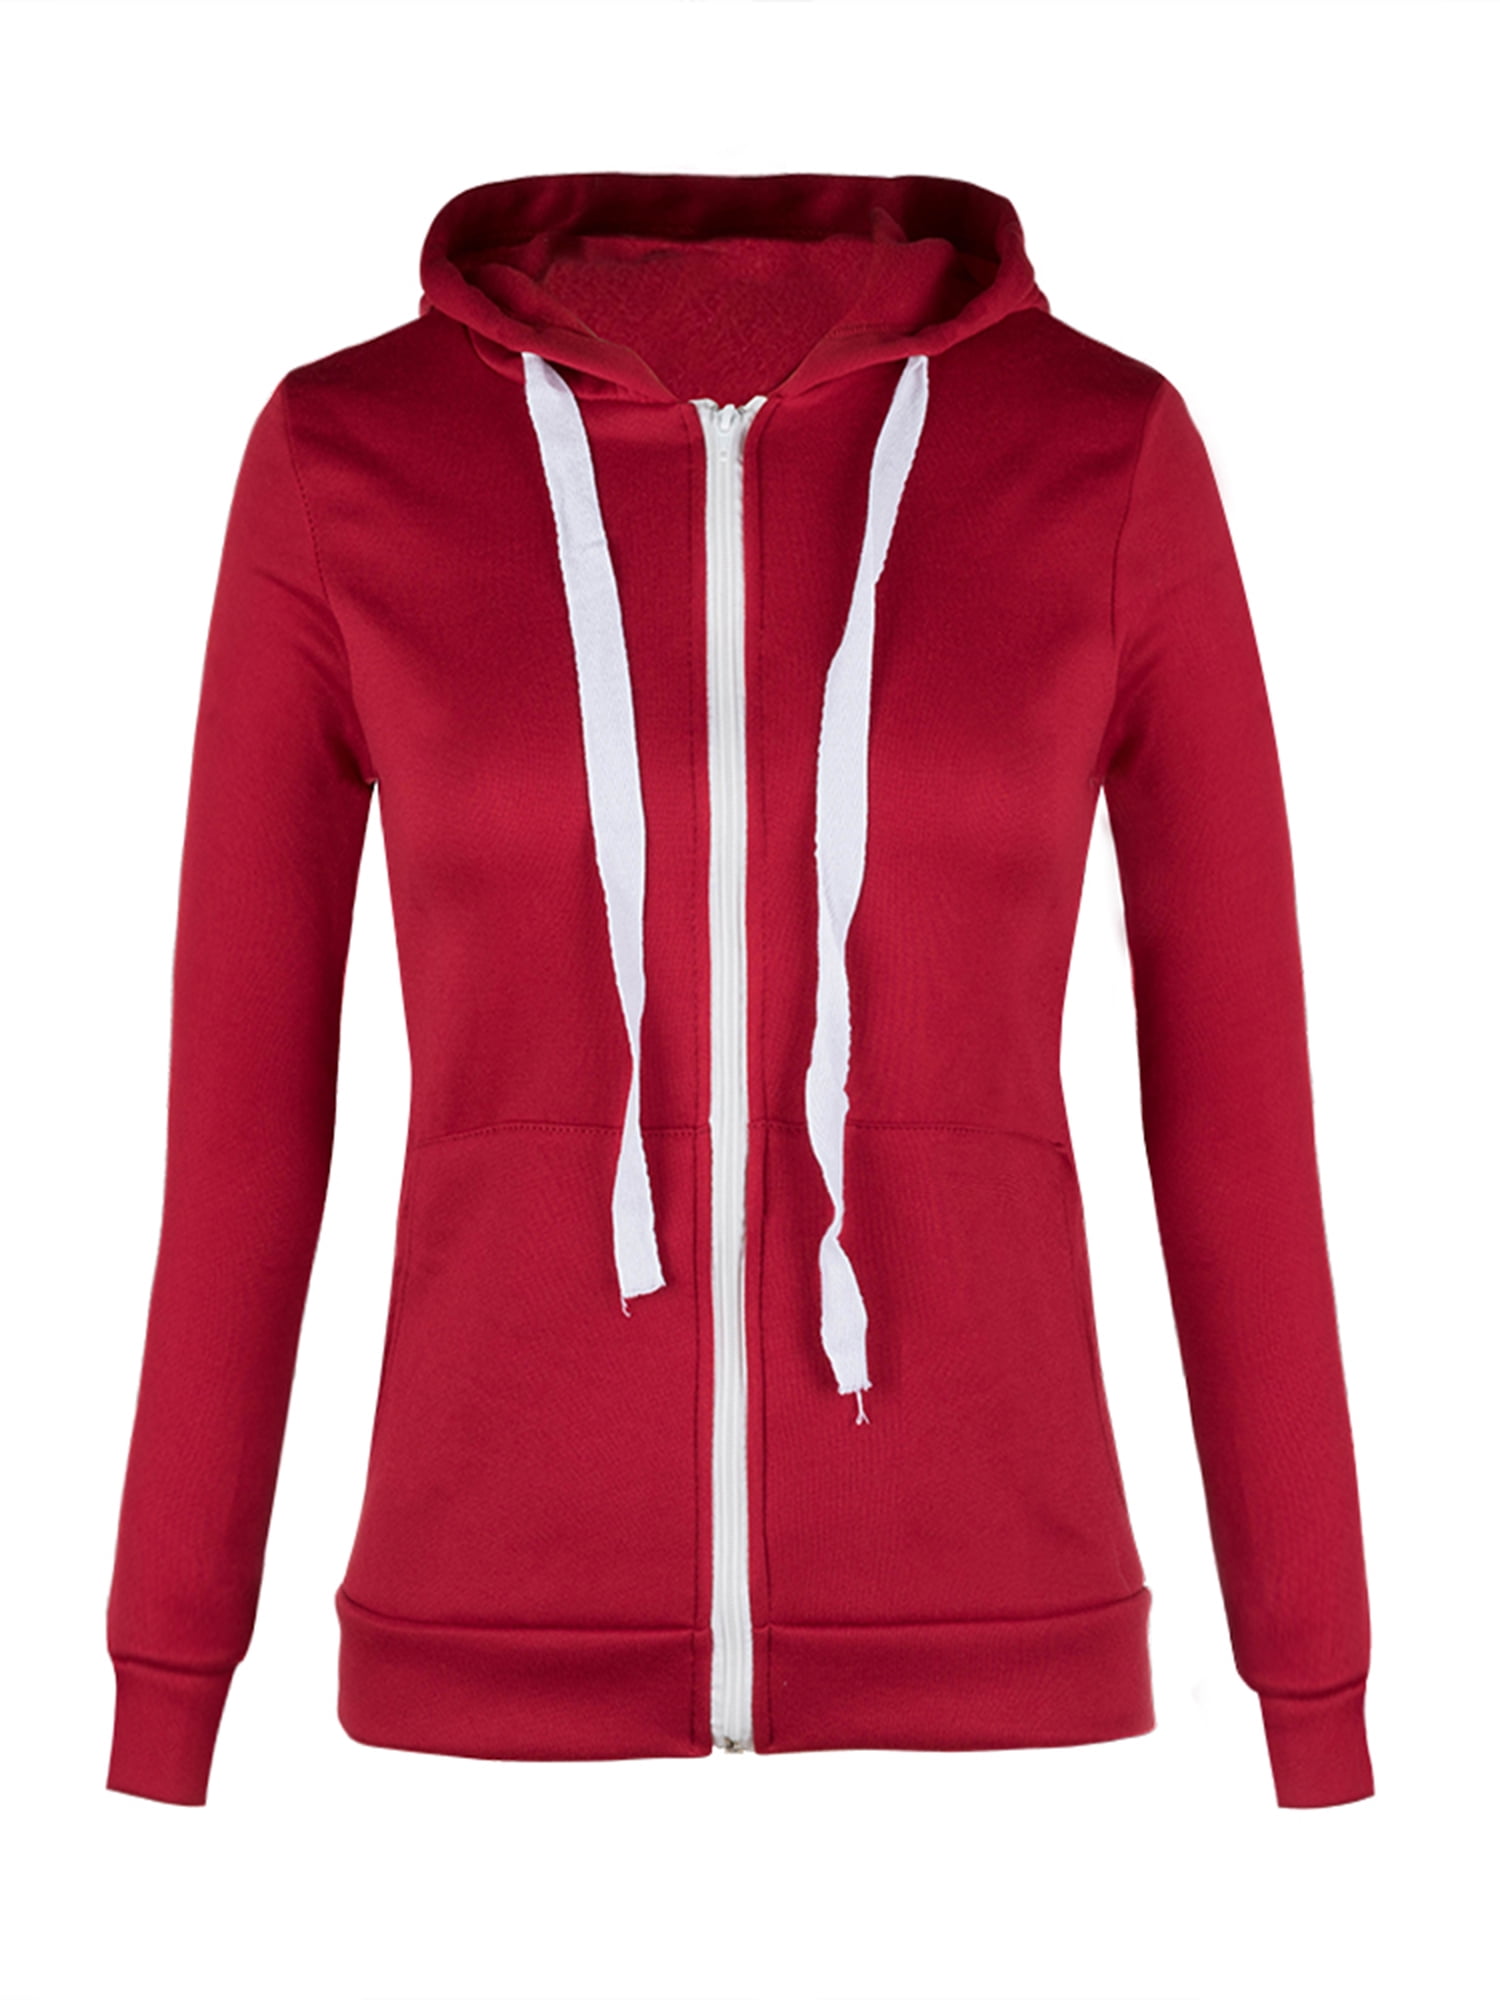 topcobe - Wine Red Lightweight Hoodie Jackets for Juniors, Girl's Long ...